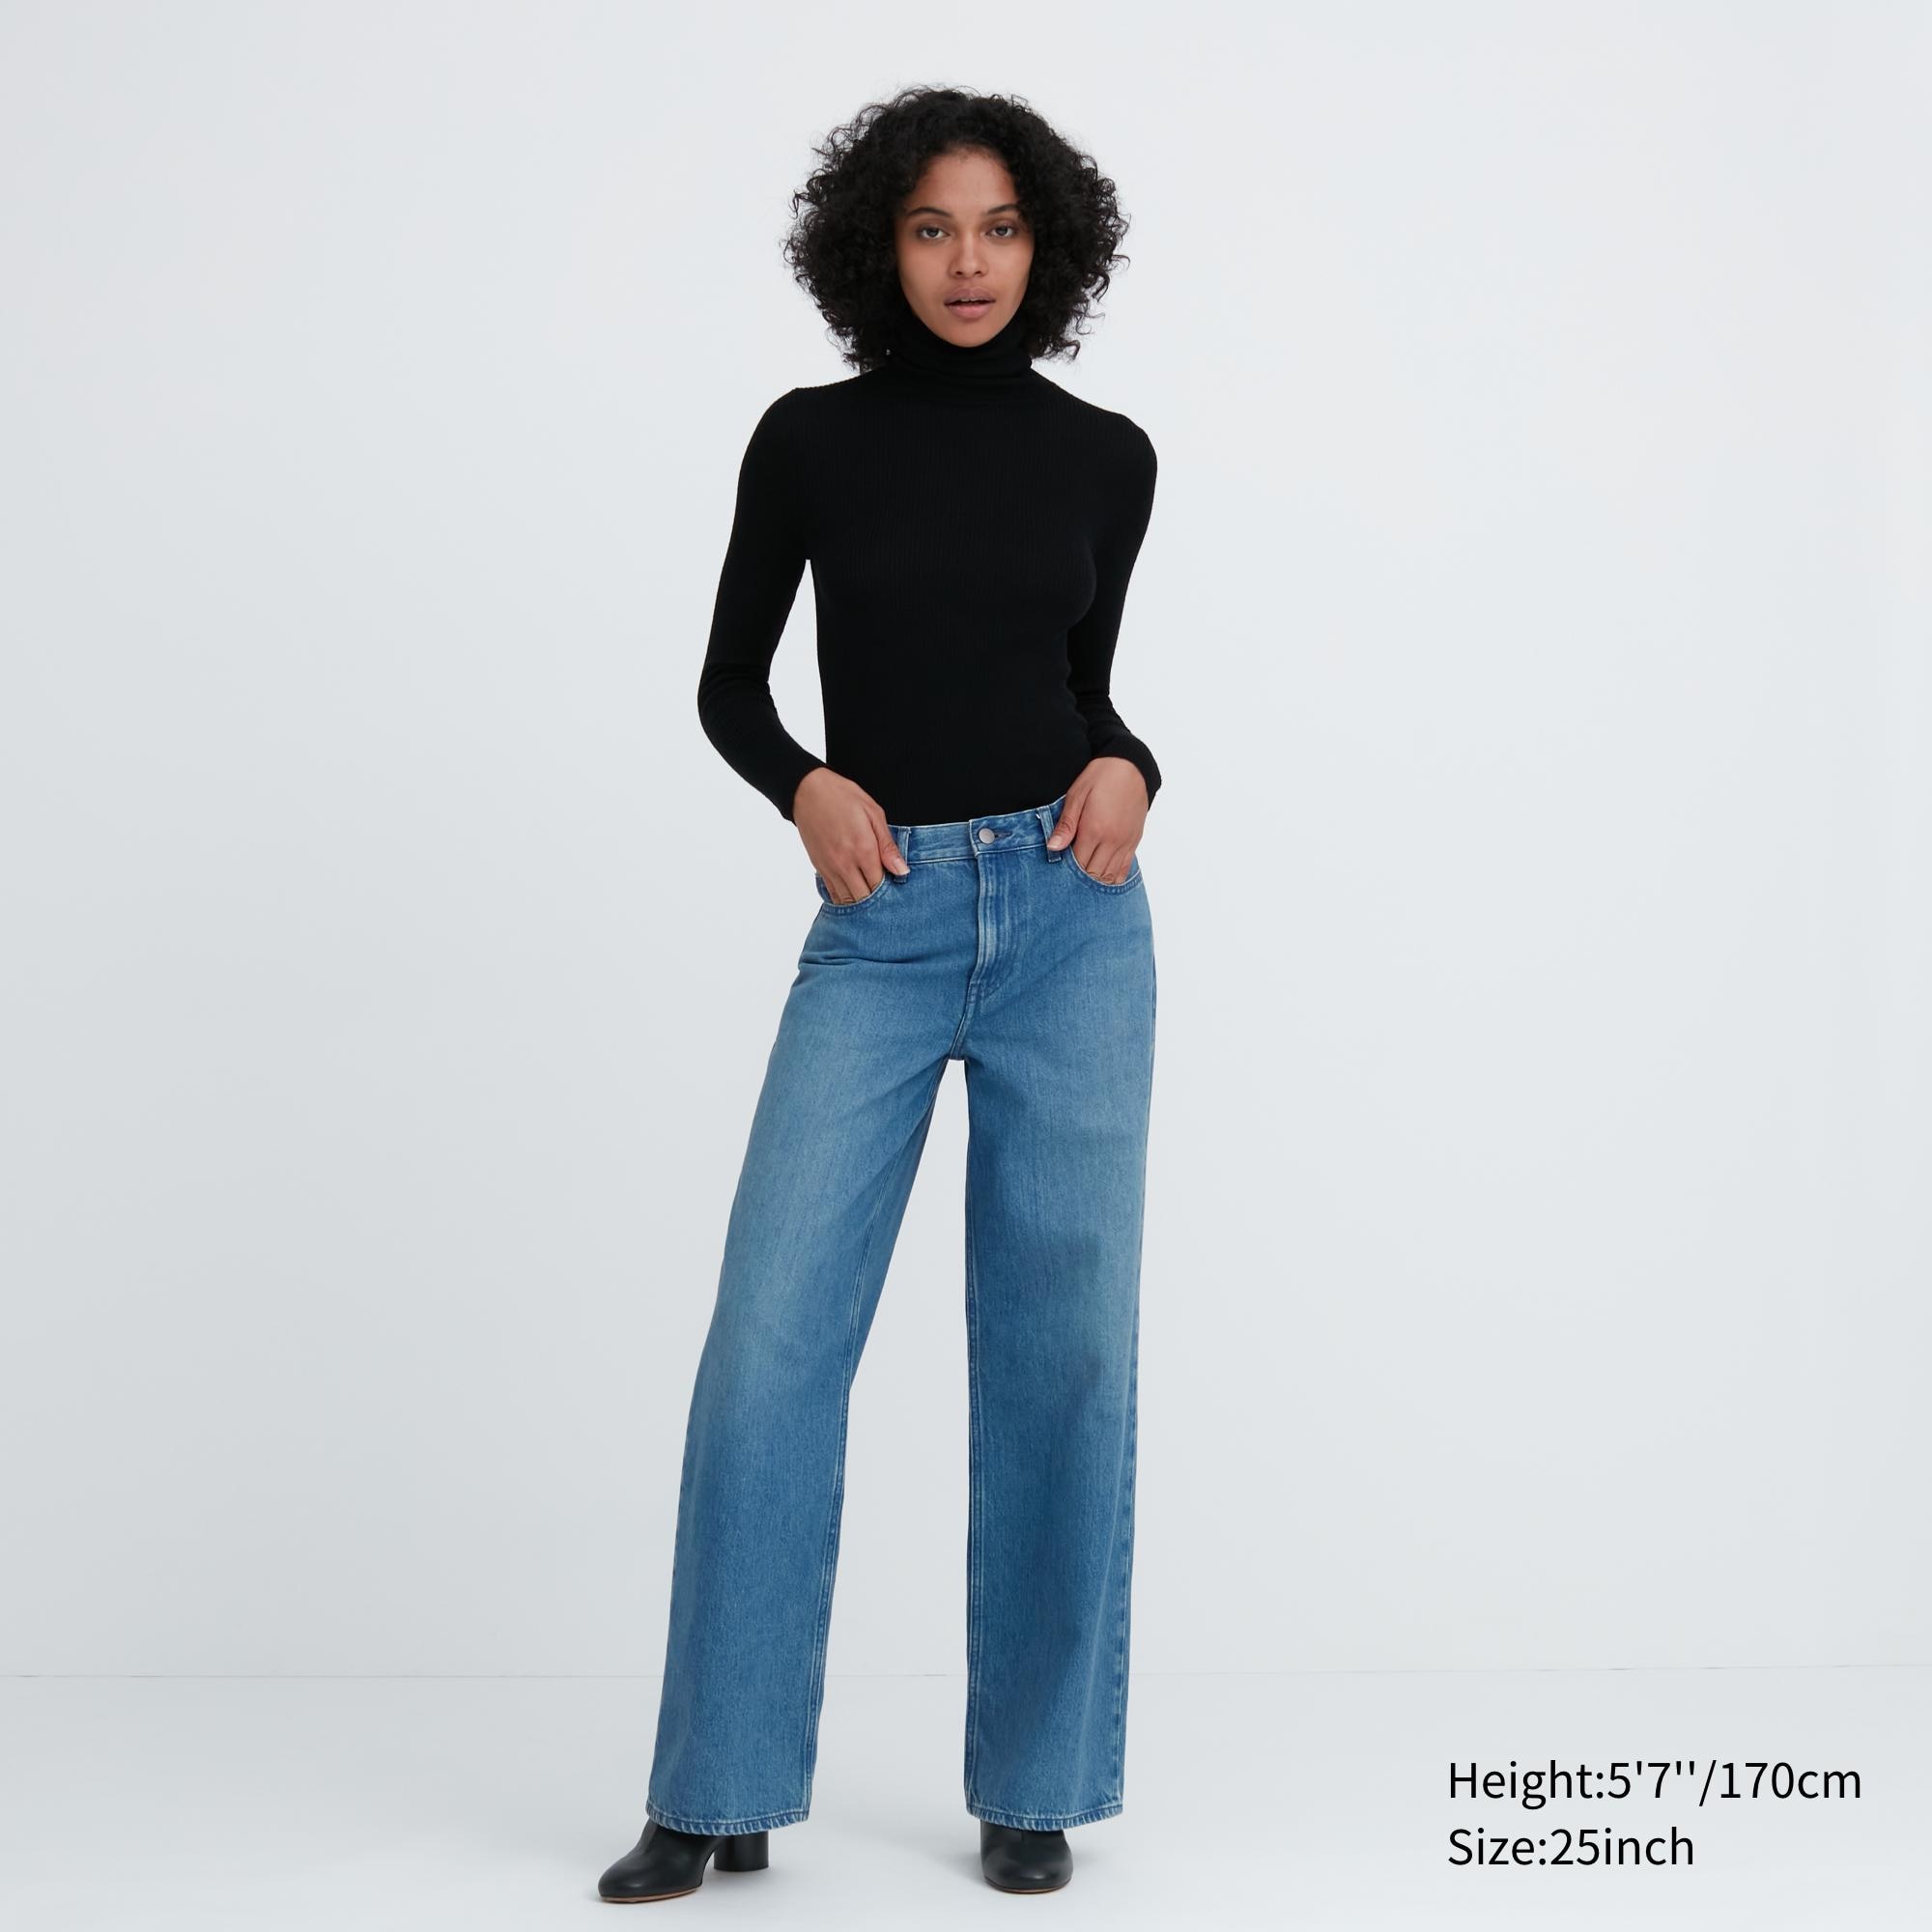 High-waist jeans for women: Top picks in trendy washes and fits | - Times  of India